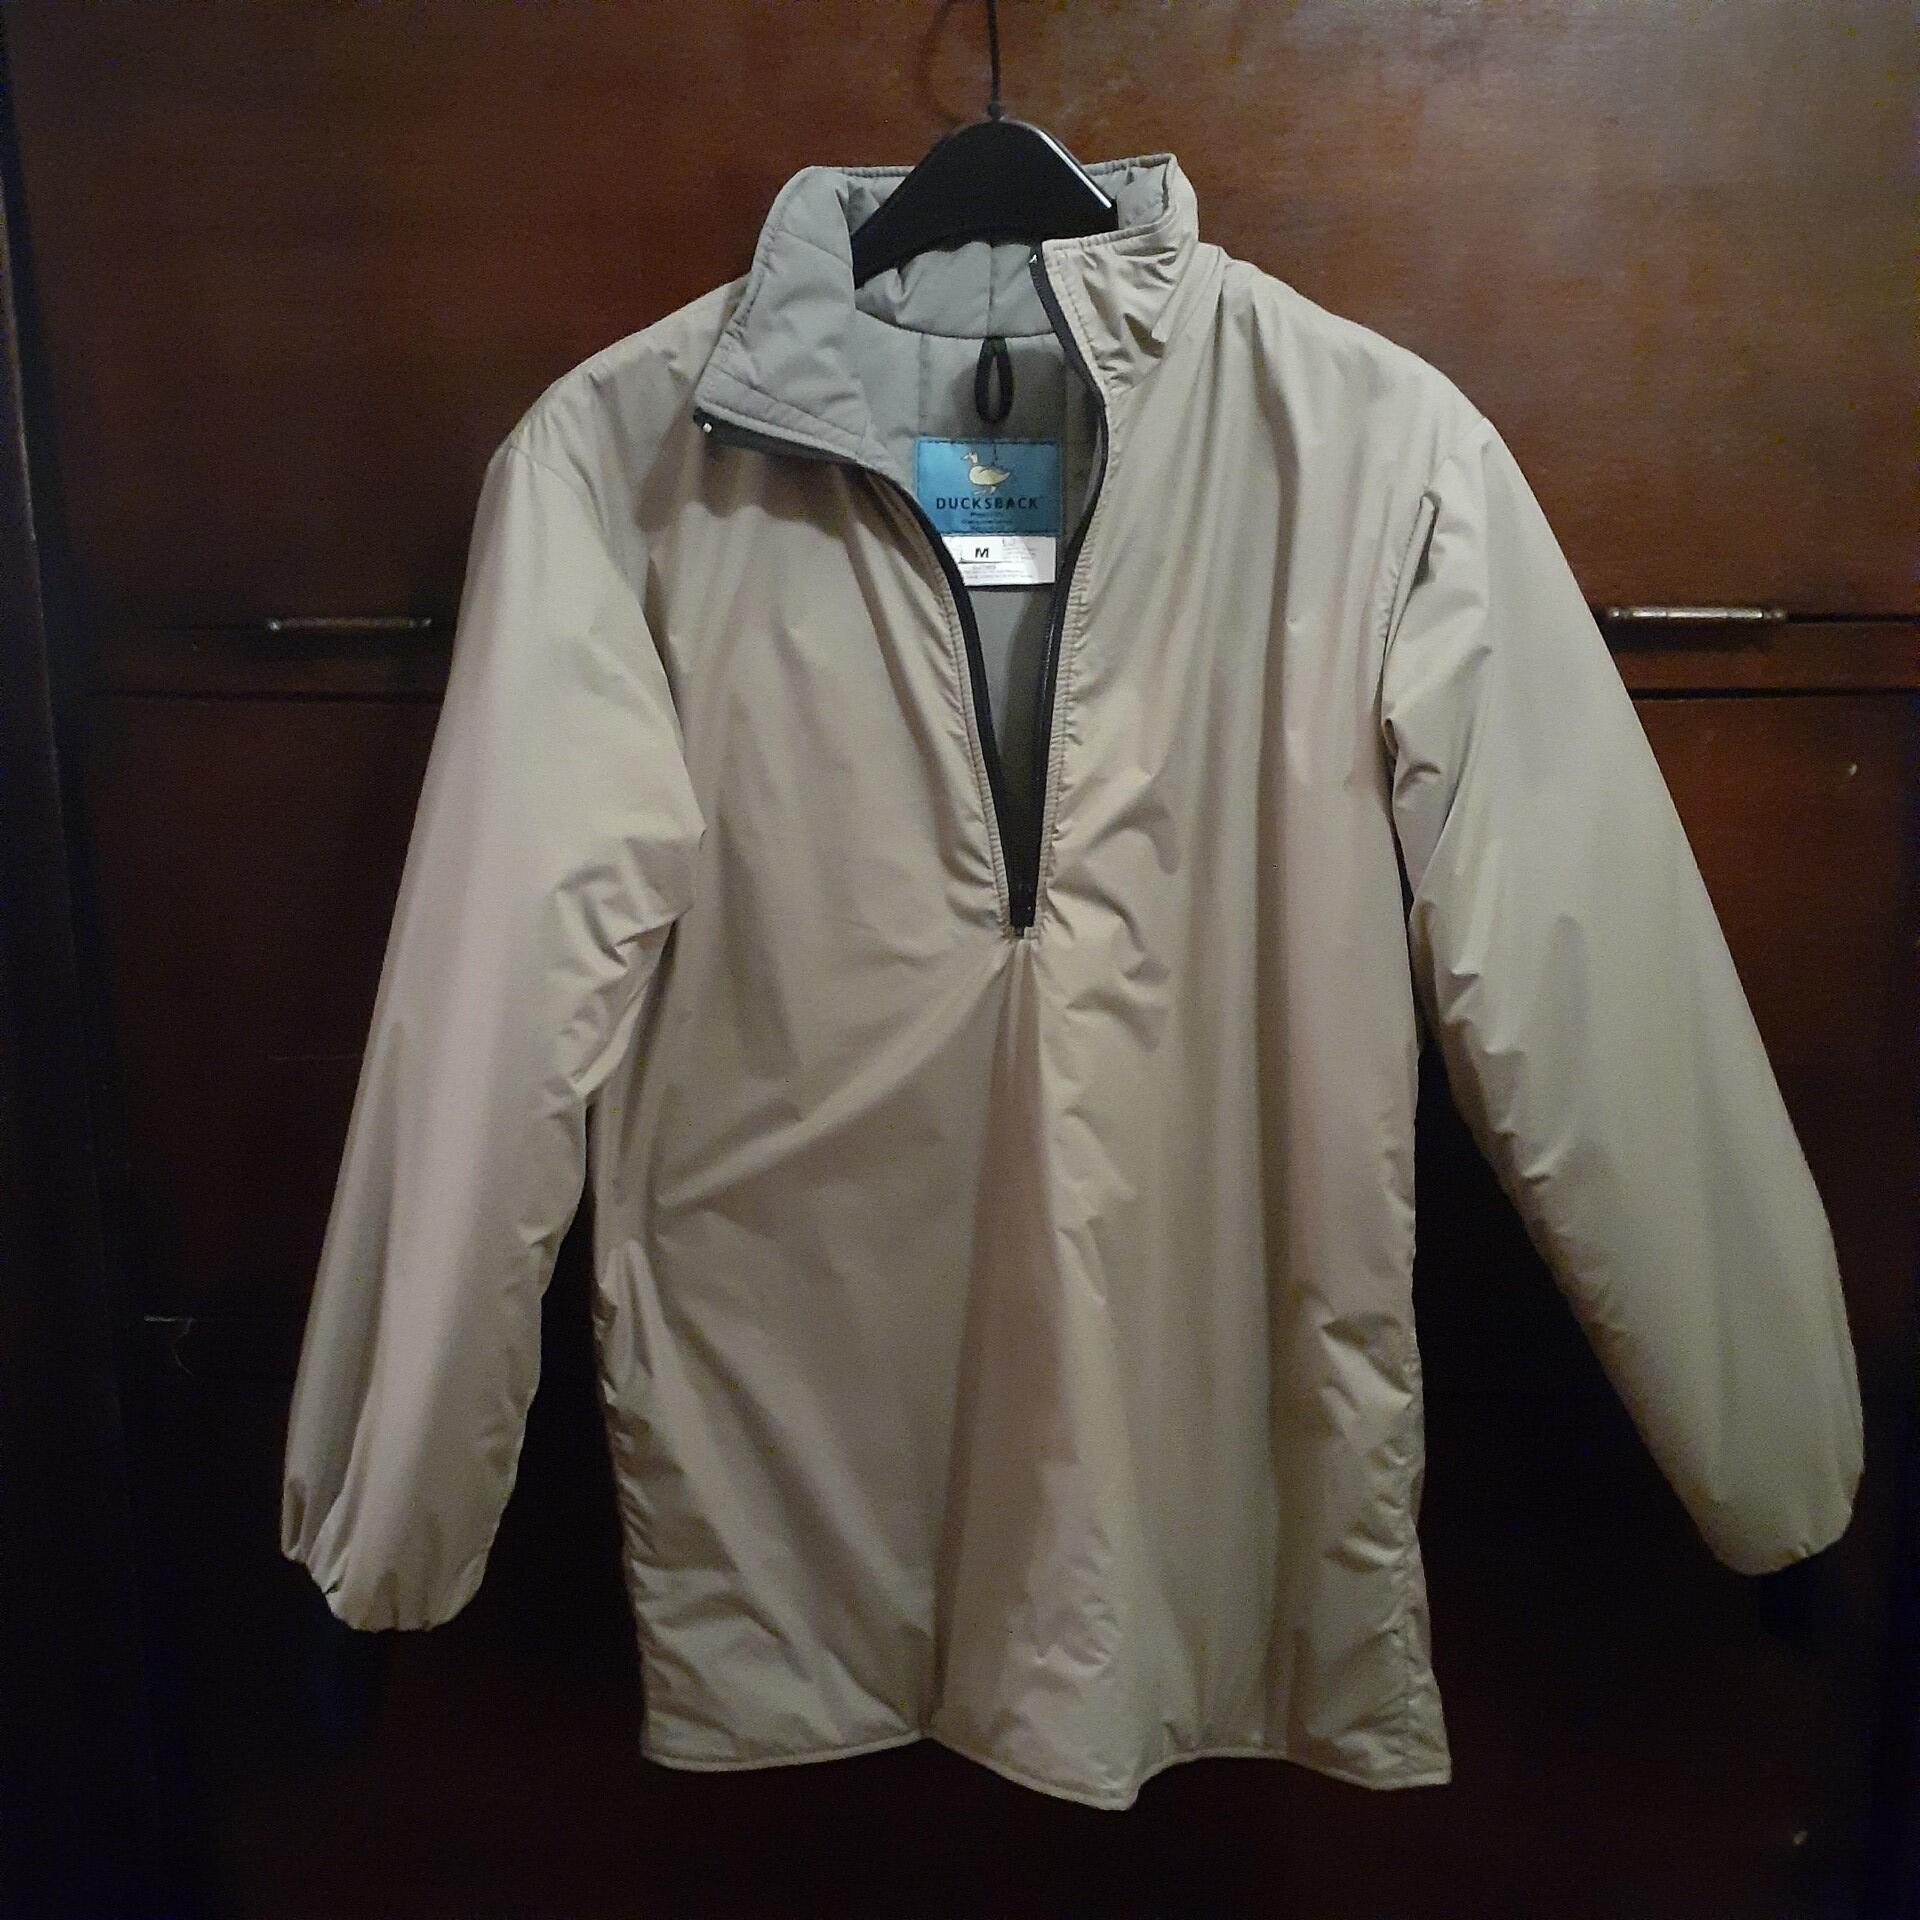 New Ducksback Wiggy’s Inc. Made in USA! Pullover zipper jacket. for $55 ...